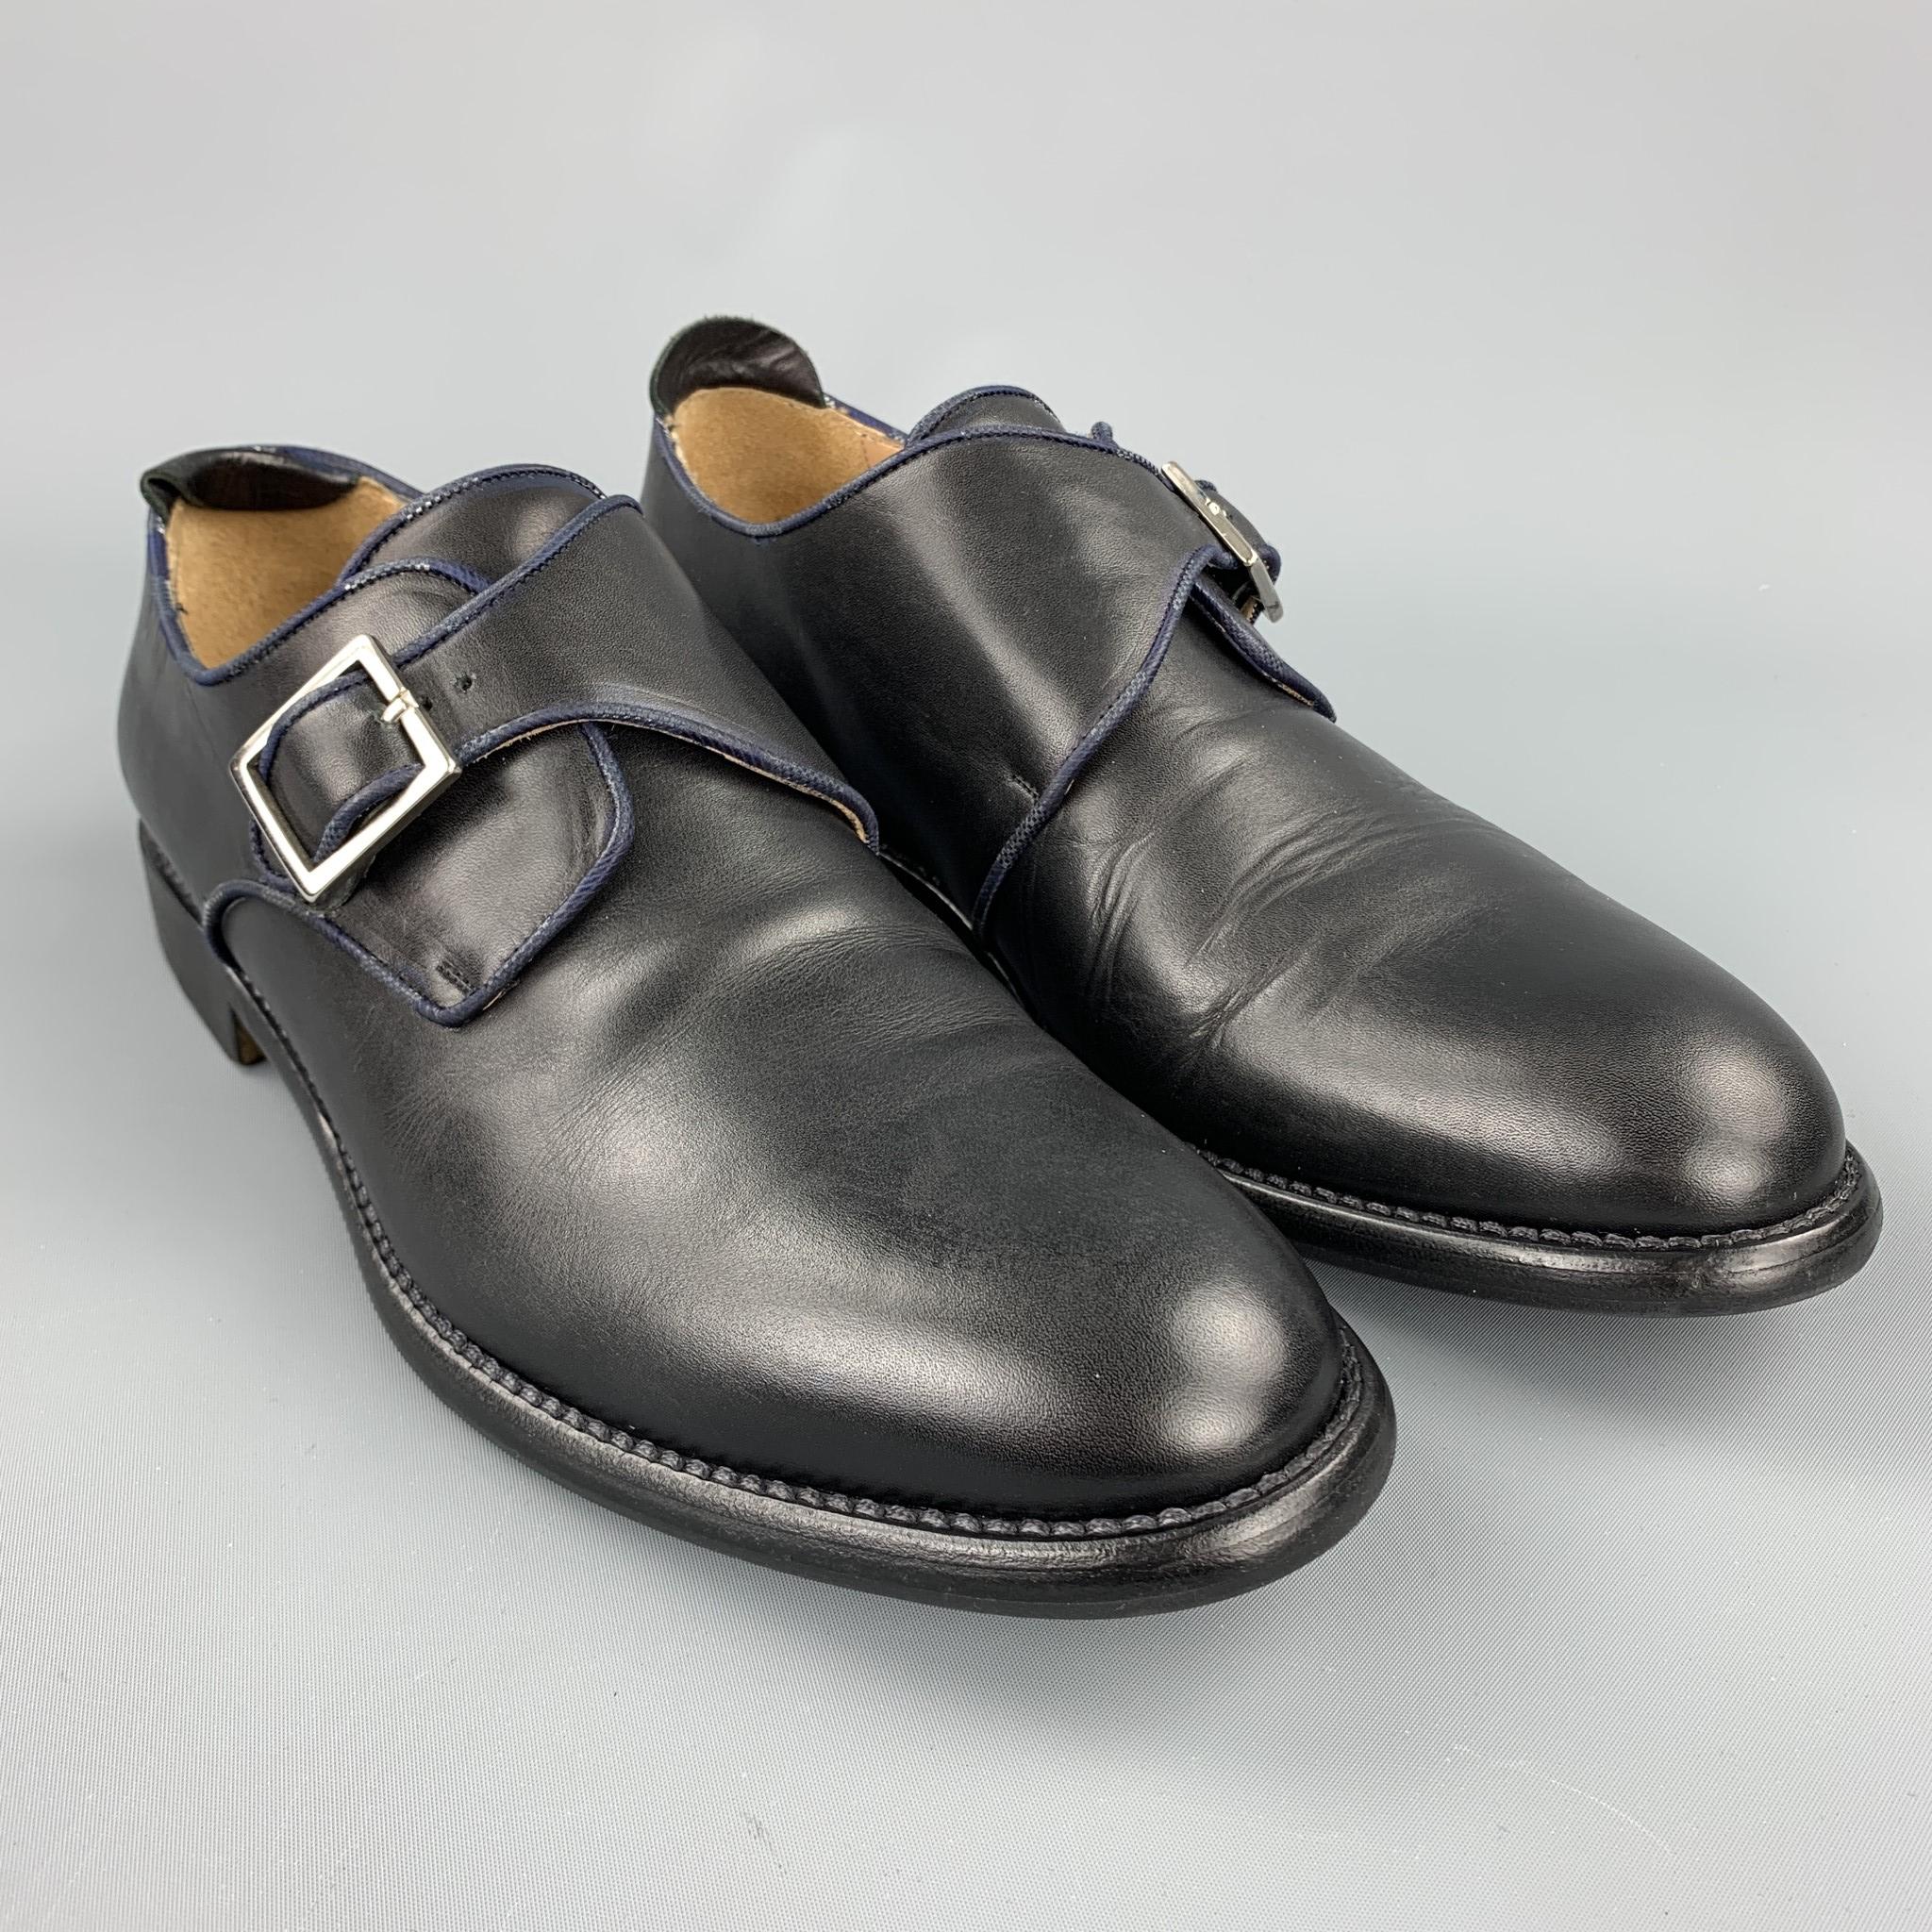 JUSTIN DEAKIN loafers comes in a black leather featuring a monk strap with a wooden heel. Made in Italy.

Excellent Pre-Owned Condition.
Marked: 10

Outsole: 

12.5 in. x 4 in. 

SKU: 103702
Category: Loafers

More Details
Brand: JUSTIN DEAKIN
Size: